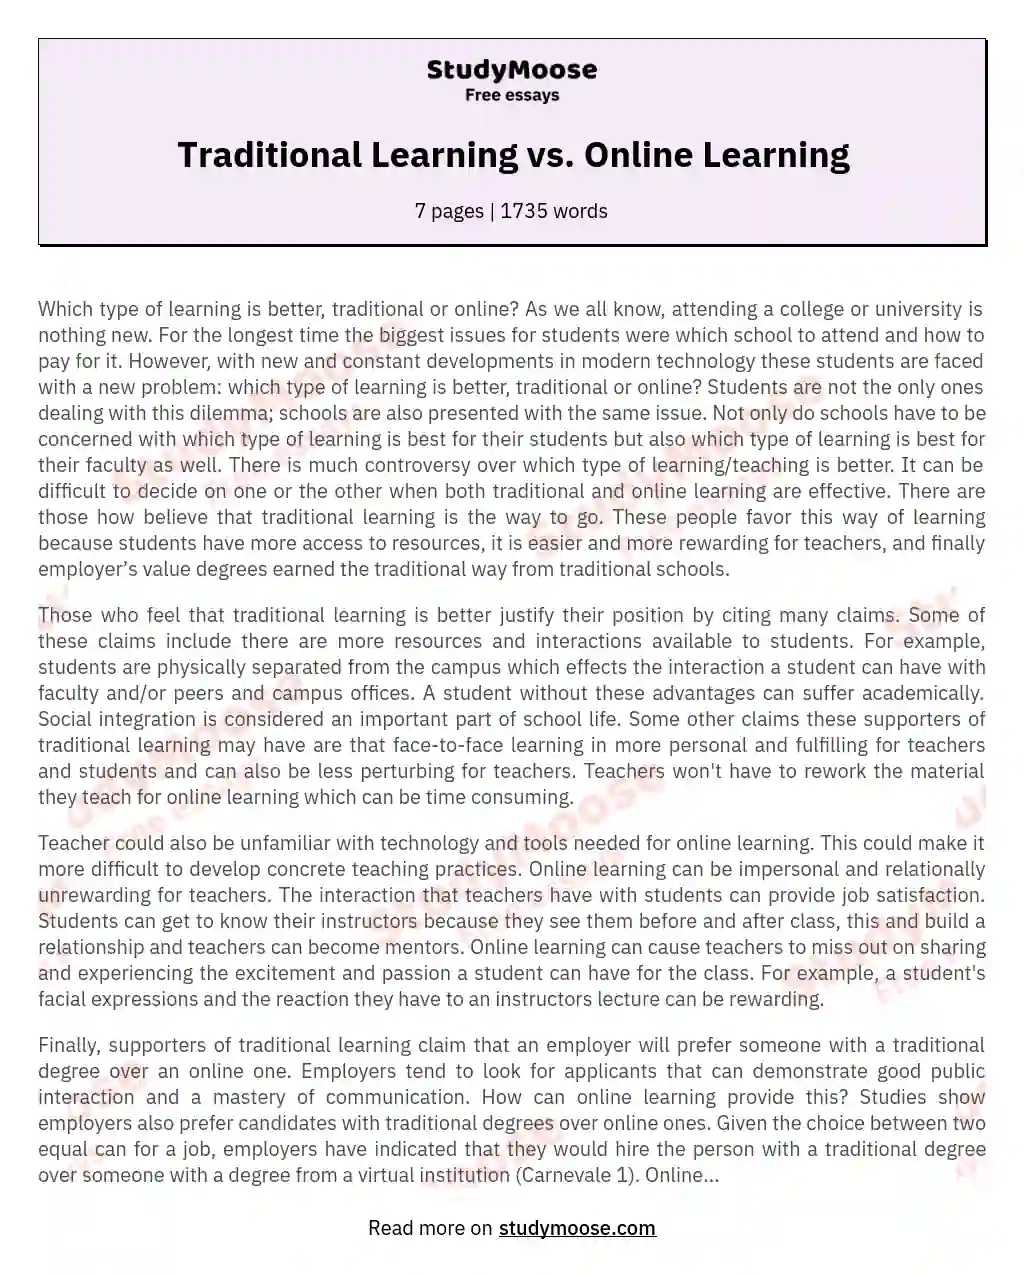 Traditional Learning vs. Online Learning